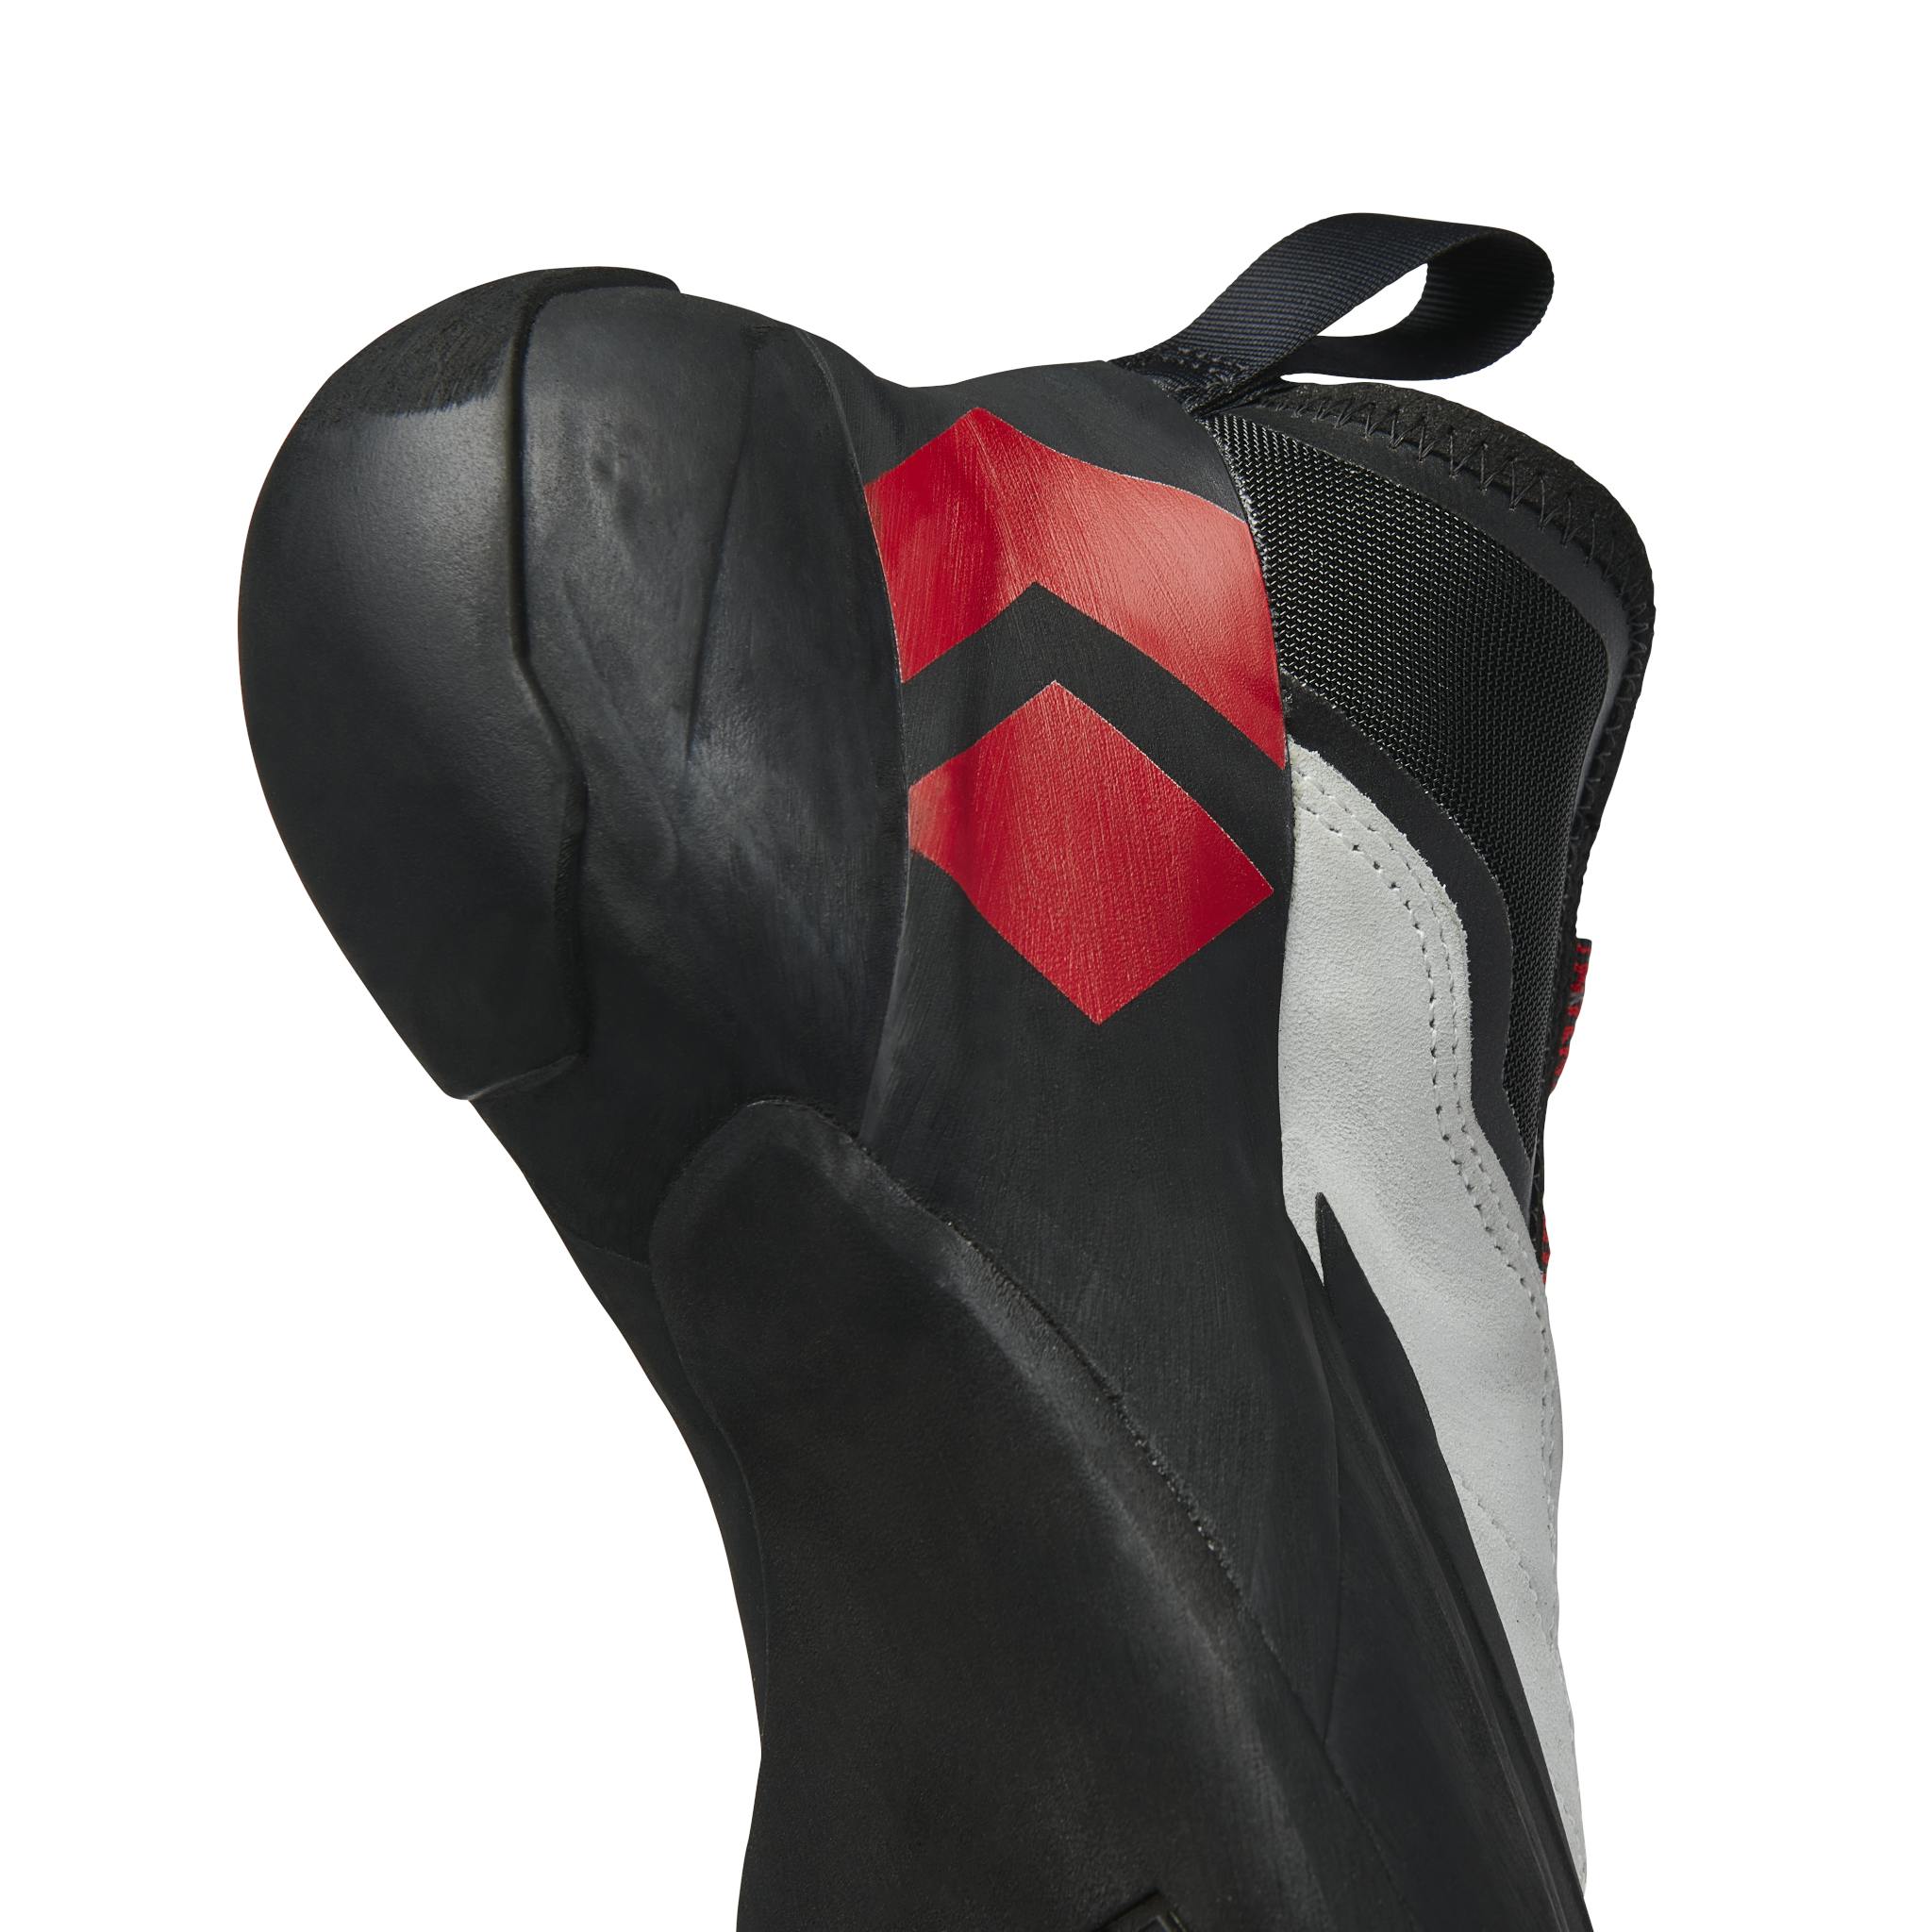 Activated slingshot and midsole using a high elasticity tension rubber